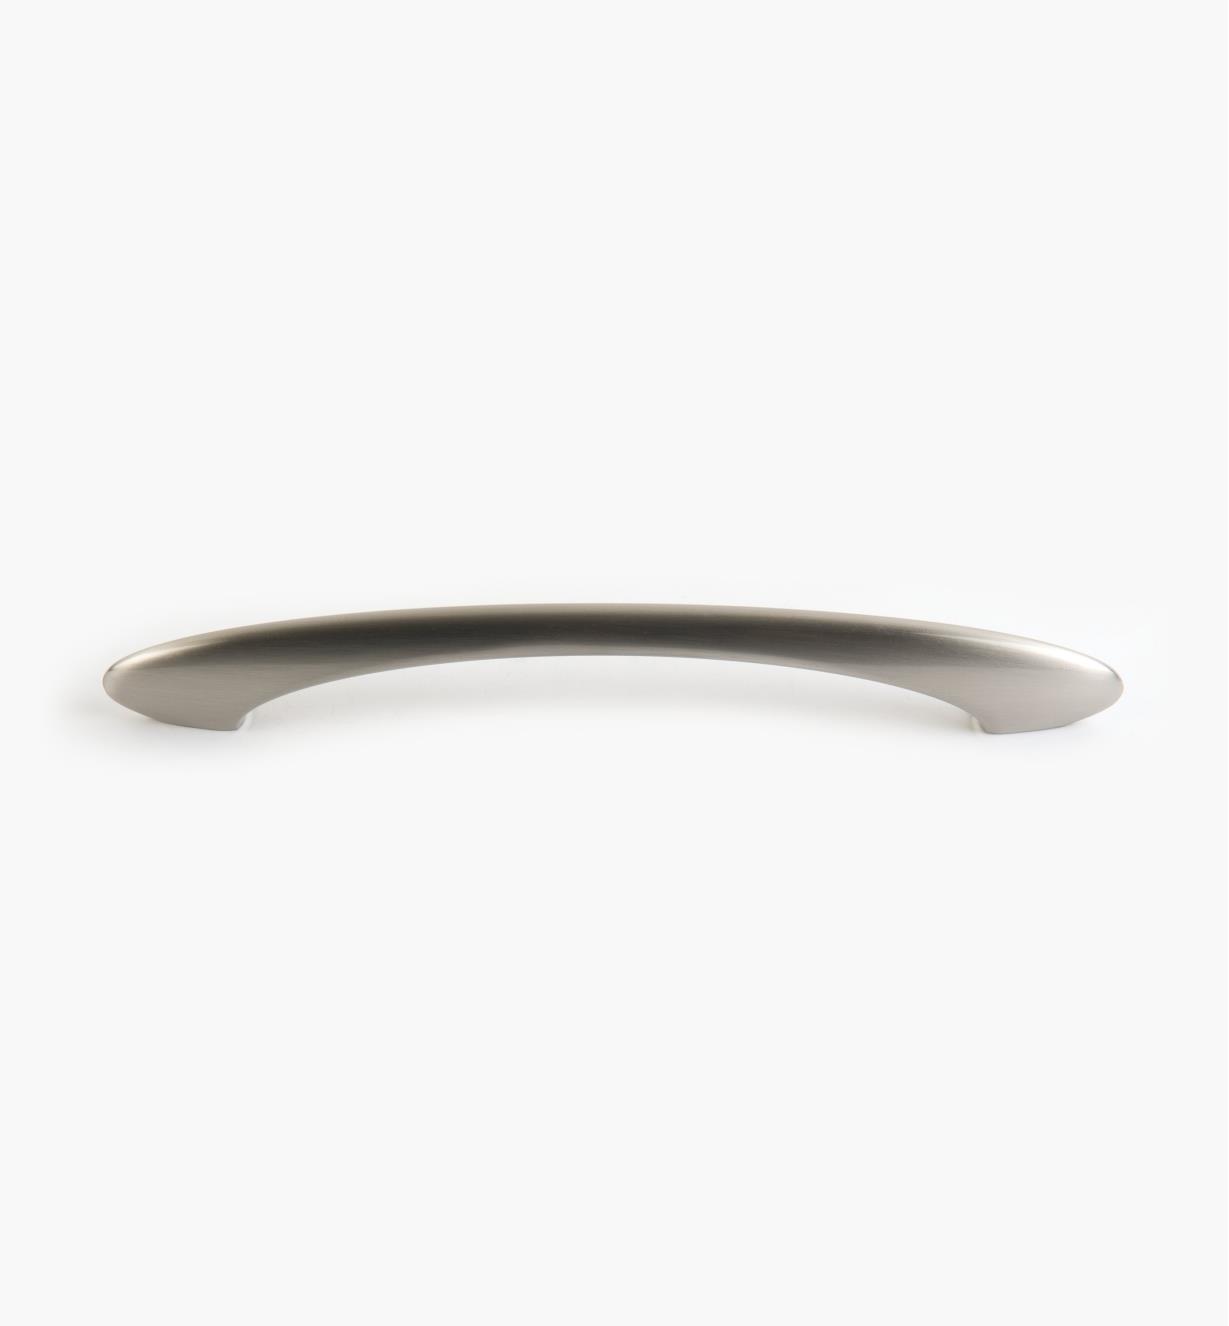 01G1464 - 192mm x 33mm Brushed Nickel Halo Handle